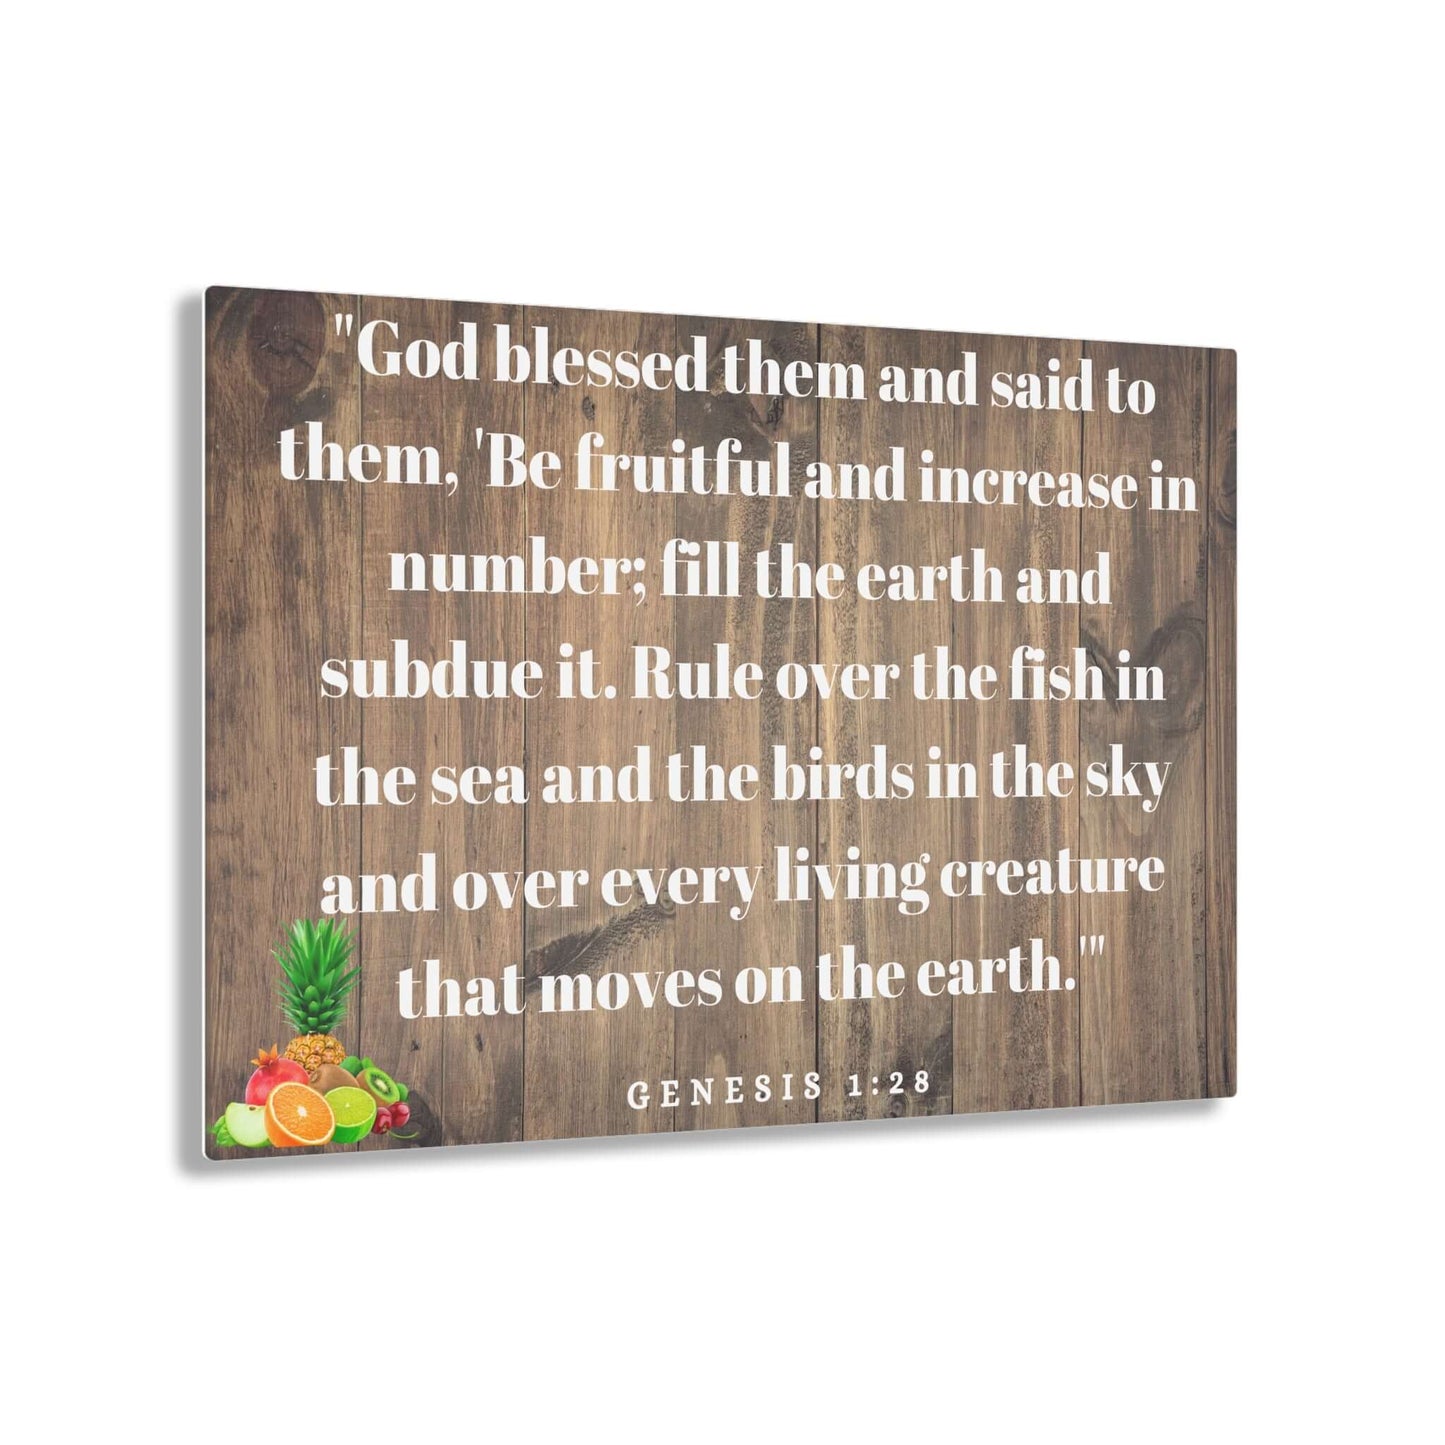 Hang Decor - Acrylic Print with Inspirational Scripture | Art & Wall Decor,Assembled in the USA,Assembled in USA,Decor,Home & Living,Home Decor,Indoor,Made in the USA,Made in USA,Poster